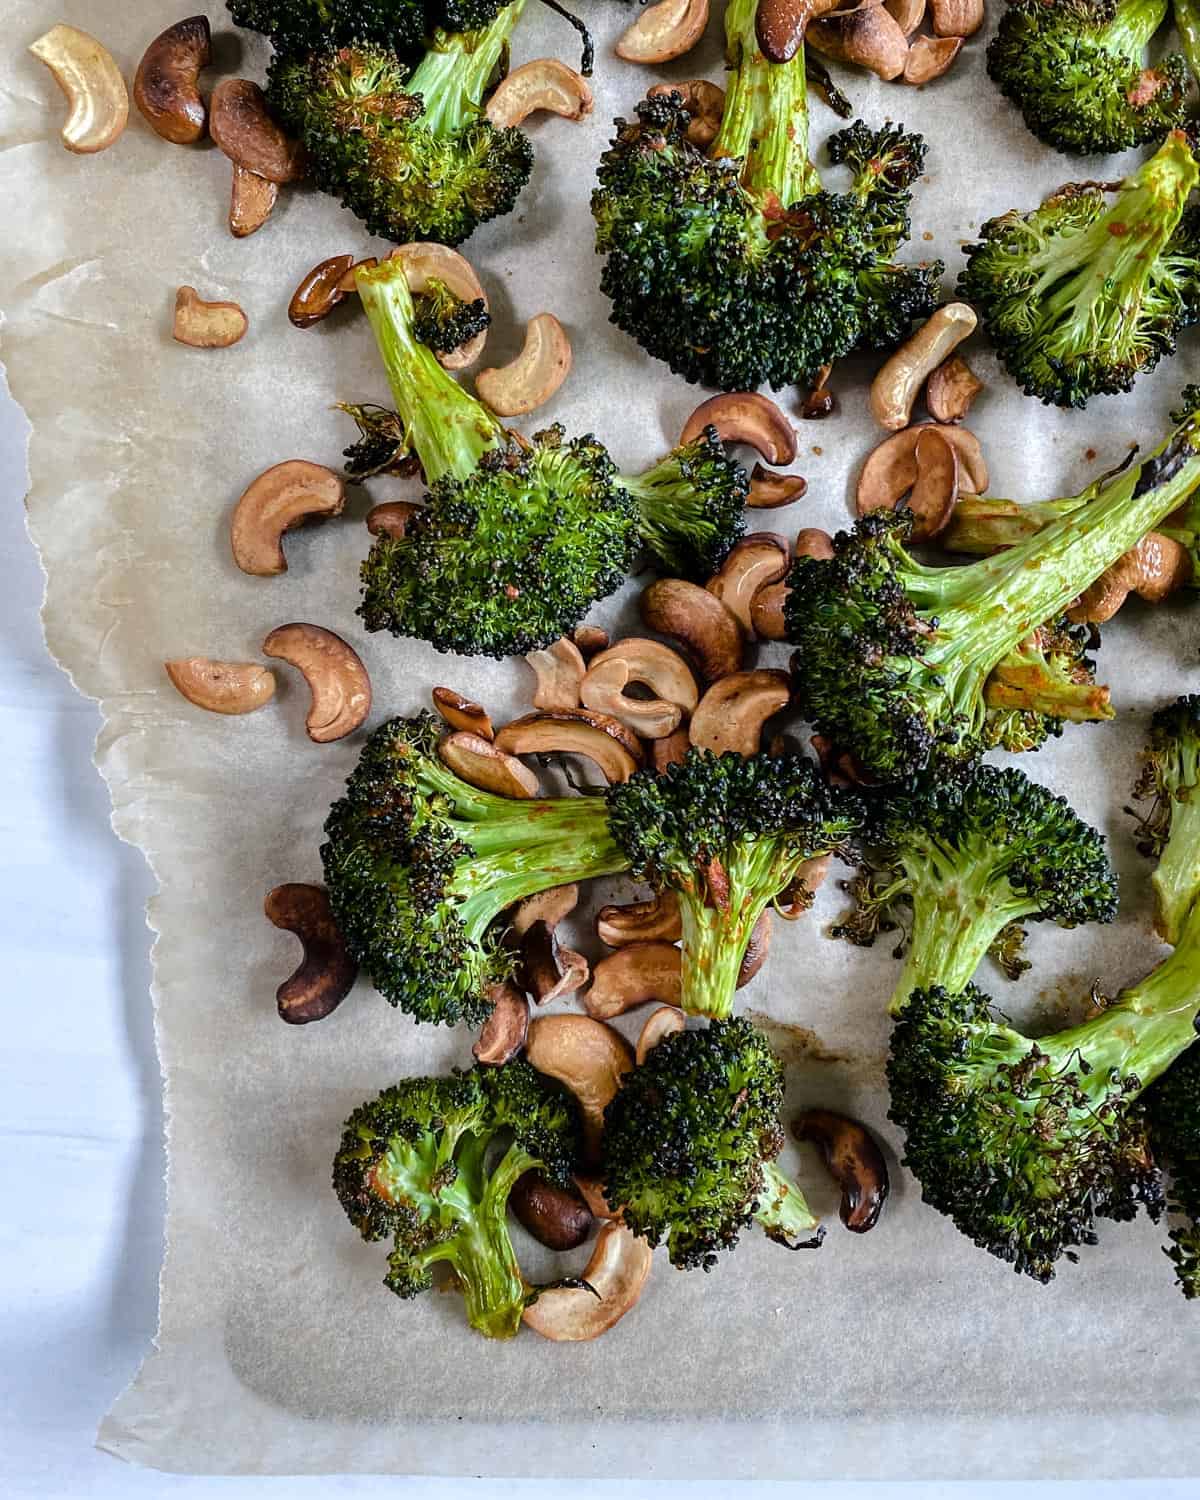 finished Roasted Curried Broccoli on parchment paper